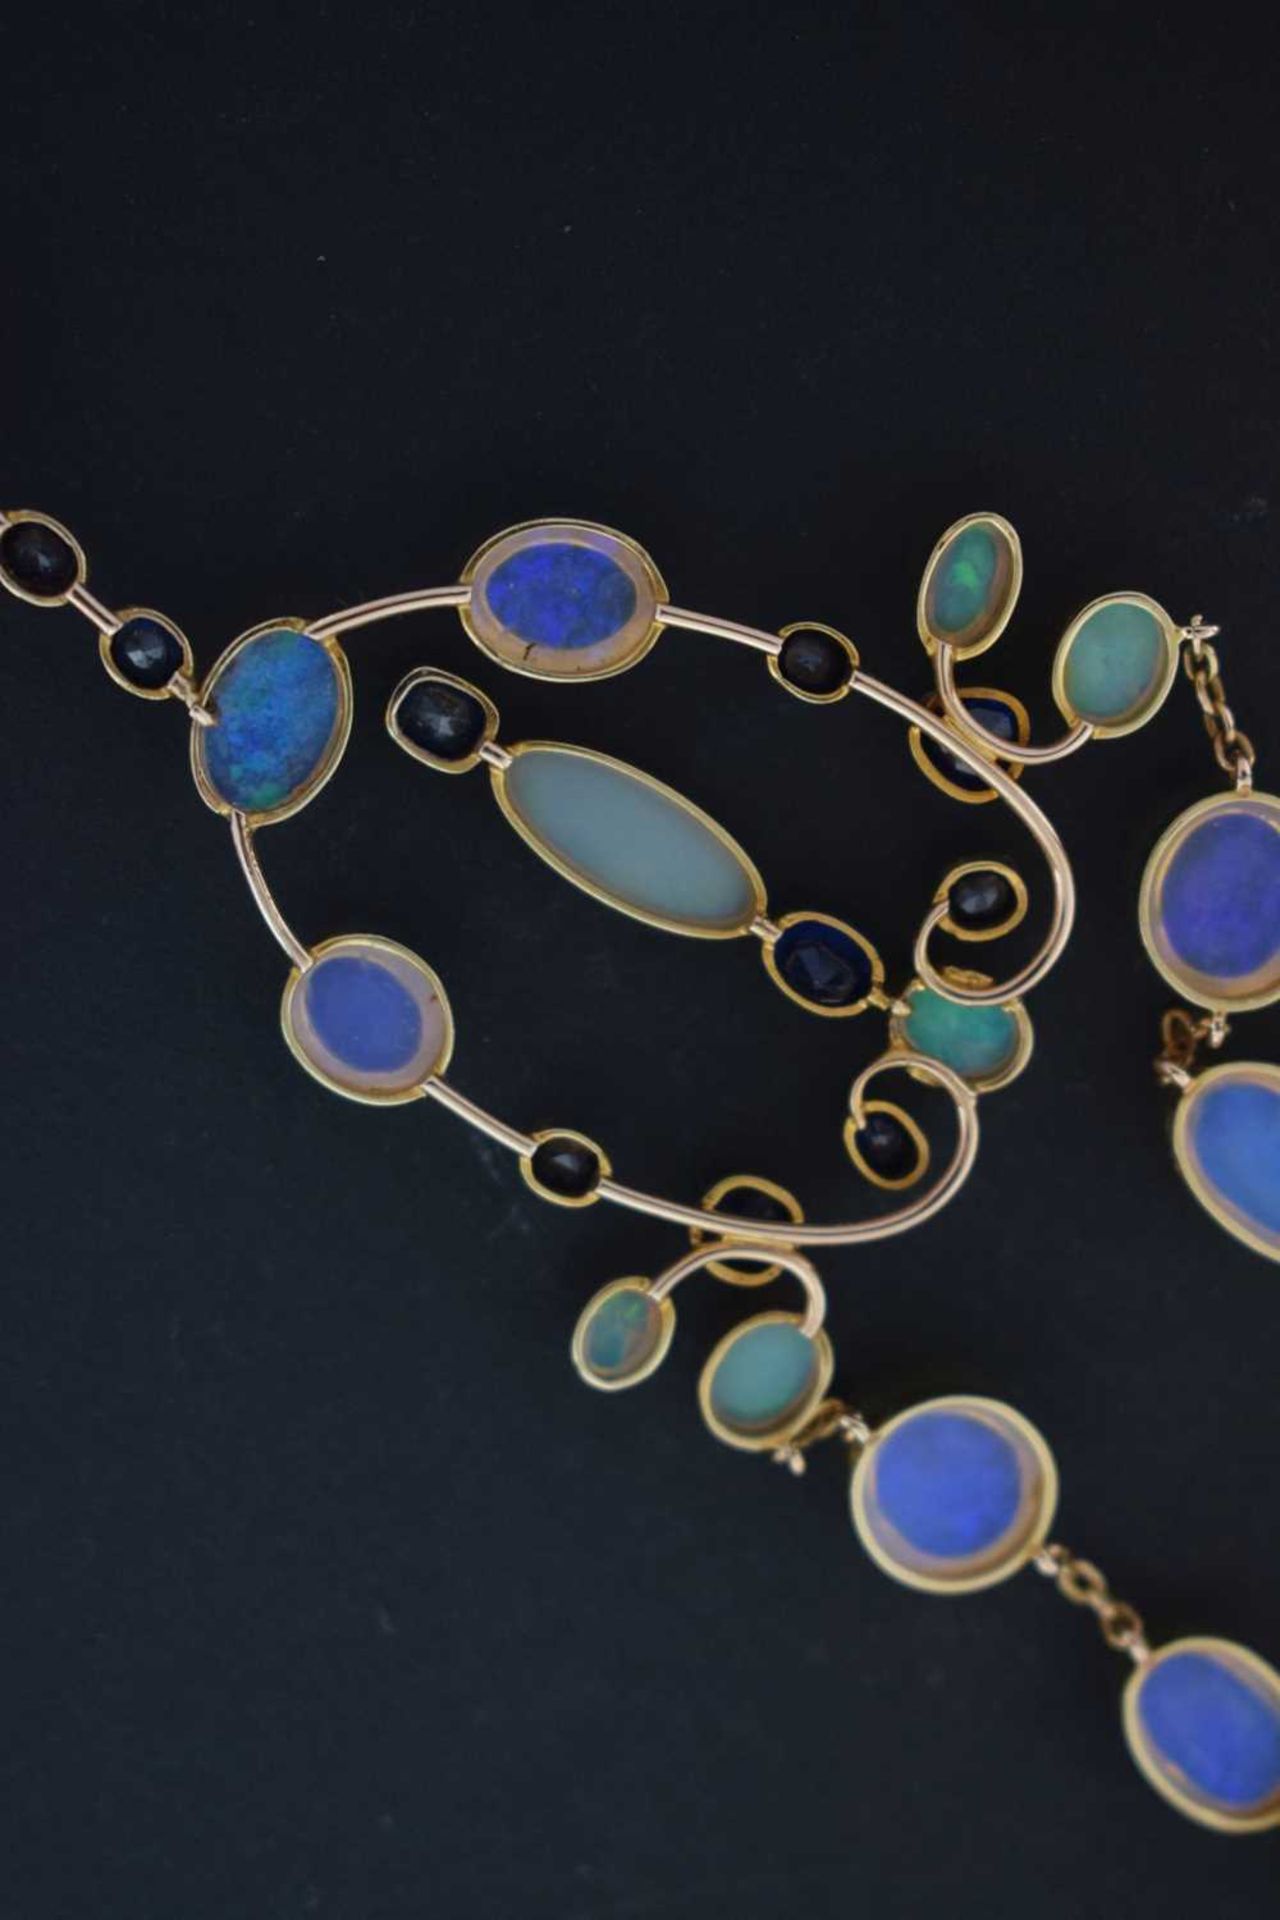 Opal and sapphire pendant necklace in the Arts and Crafts manner - Image 8 of 12